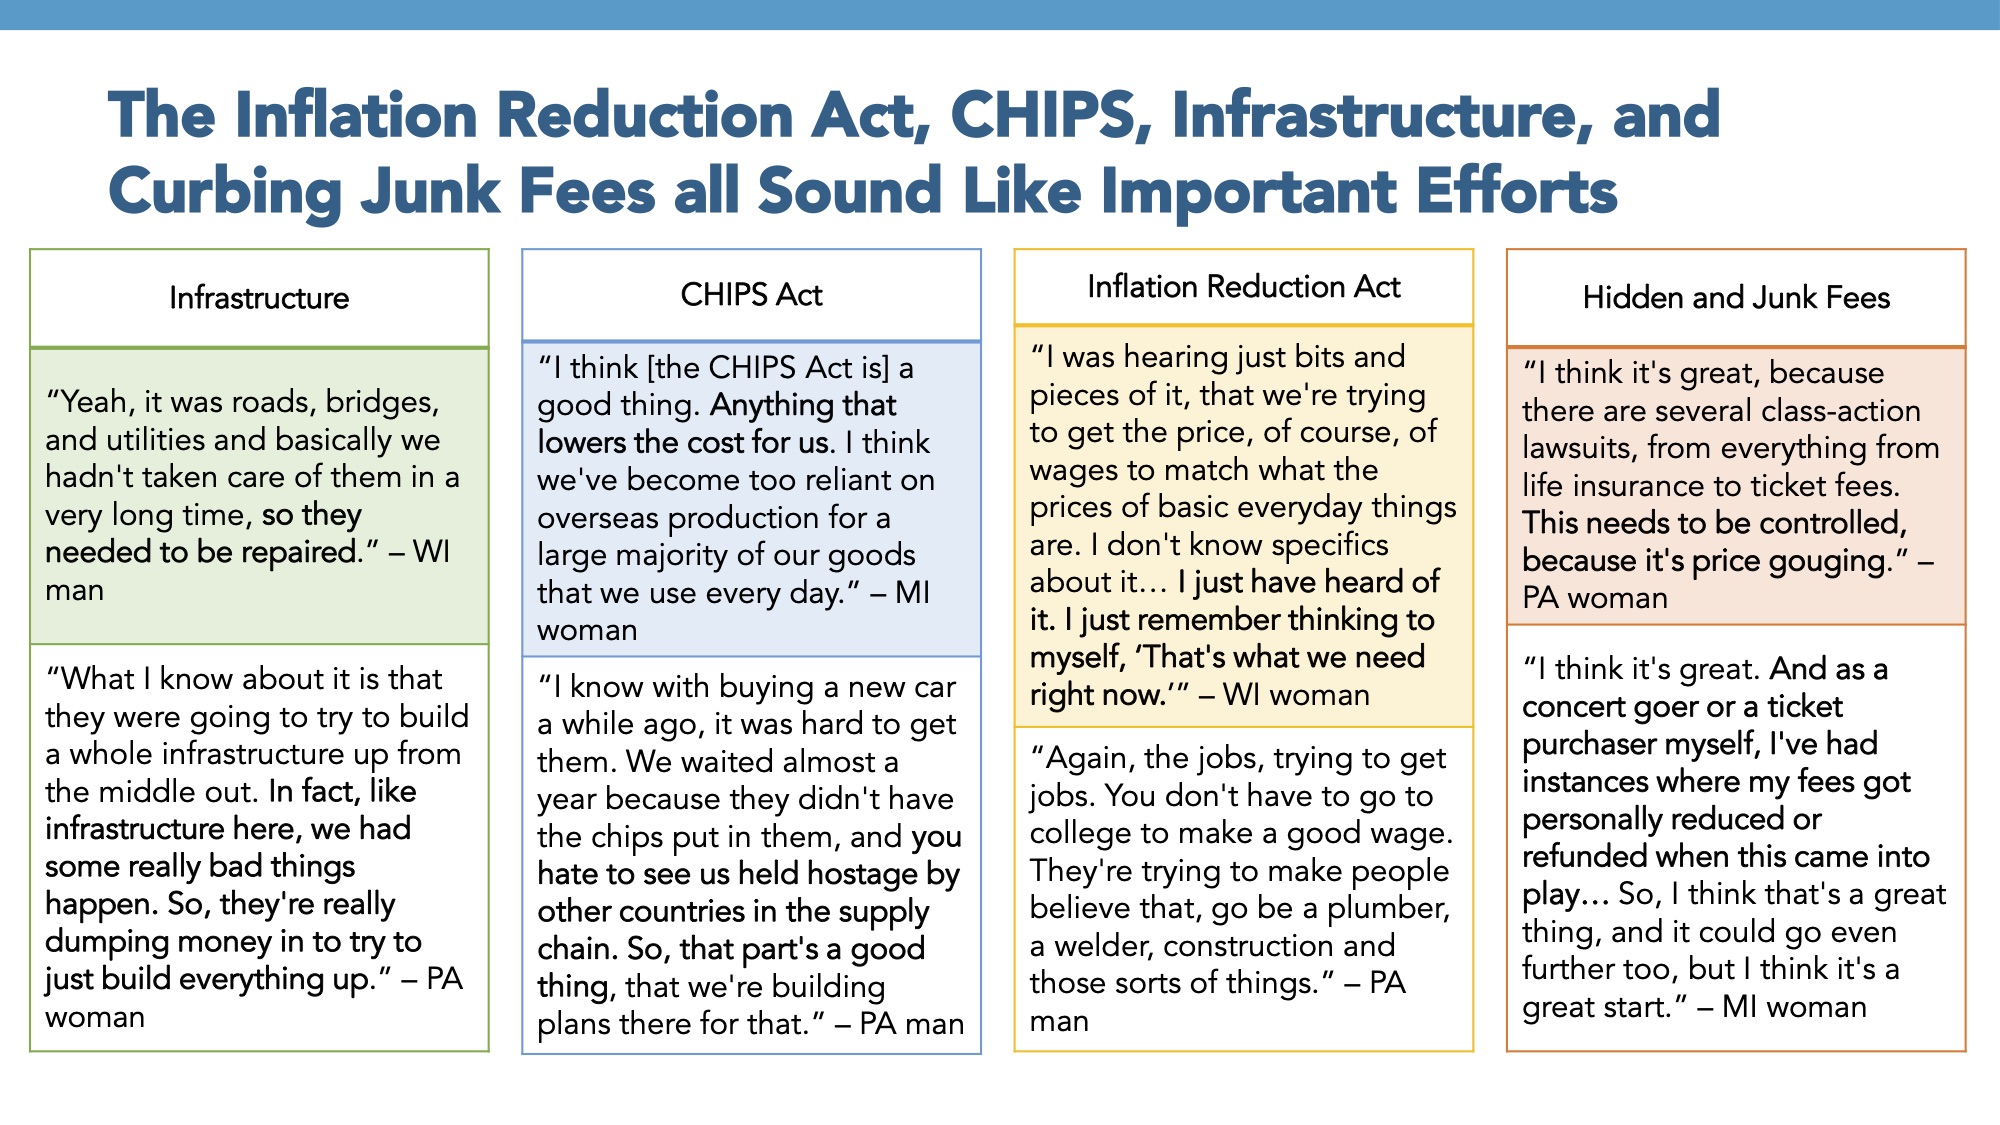 Focus group report slide titled: The Inflation Reduction Act, CHIPS, Infrastructure, and Curbing Junk Fees all Sound Like Important Efforts